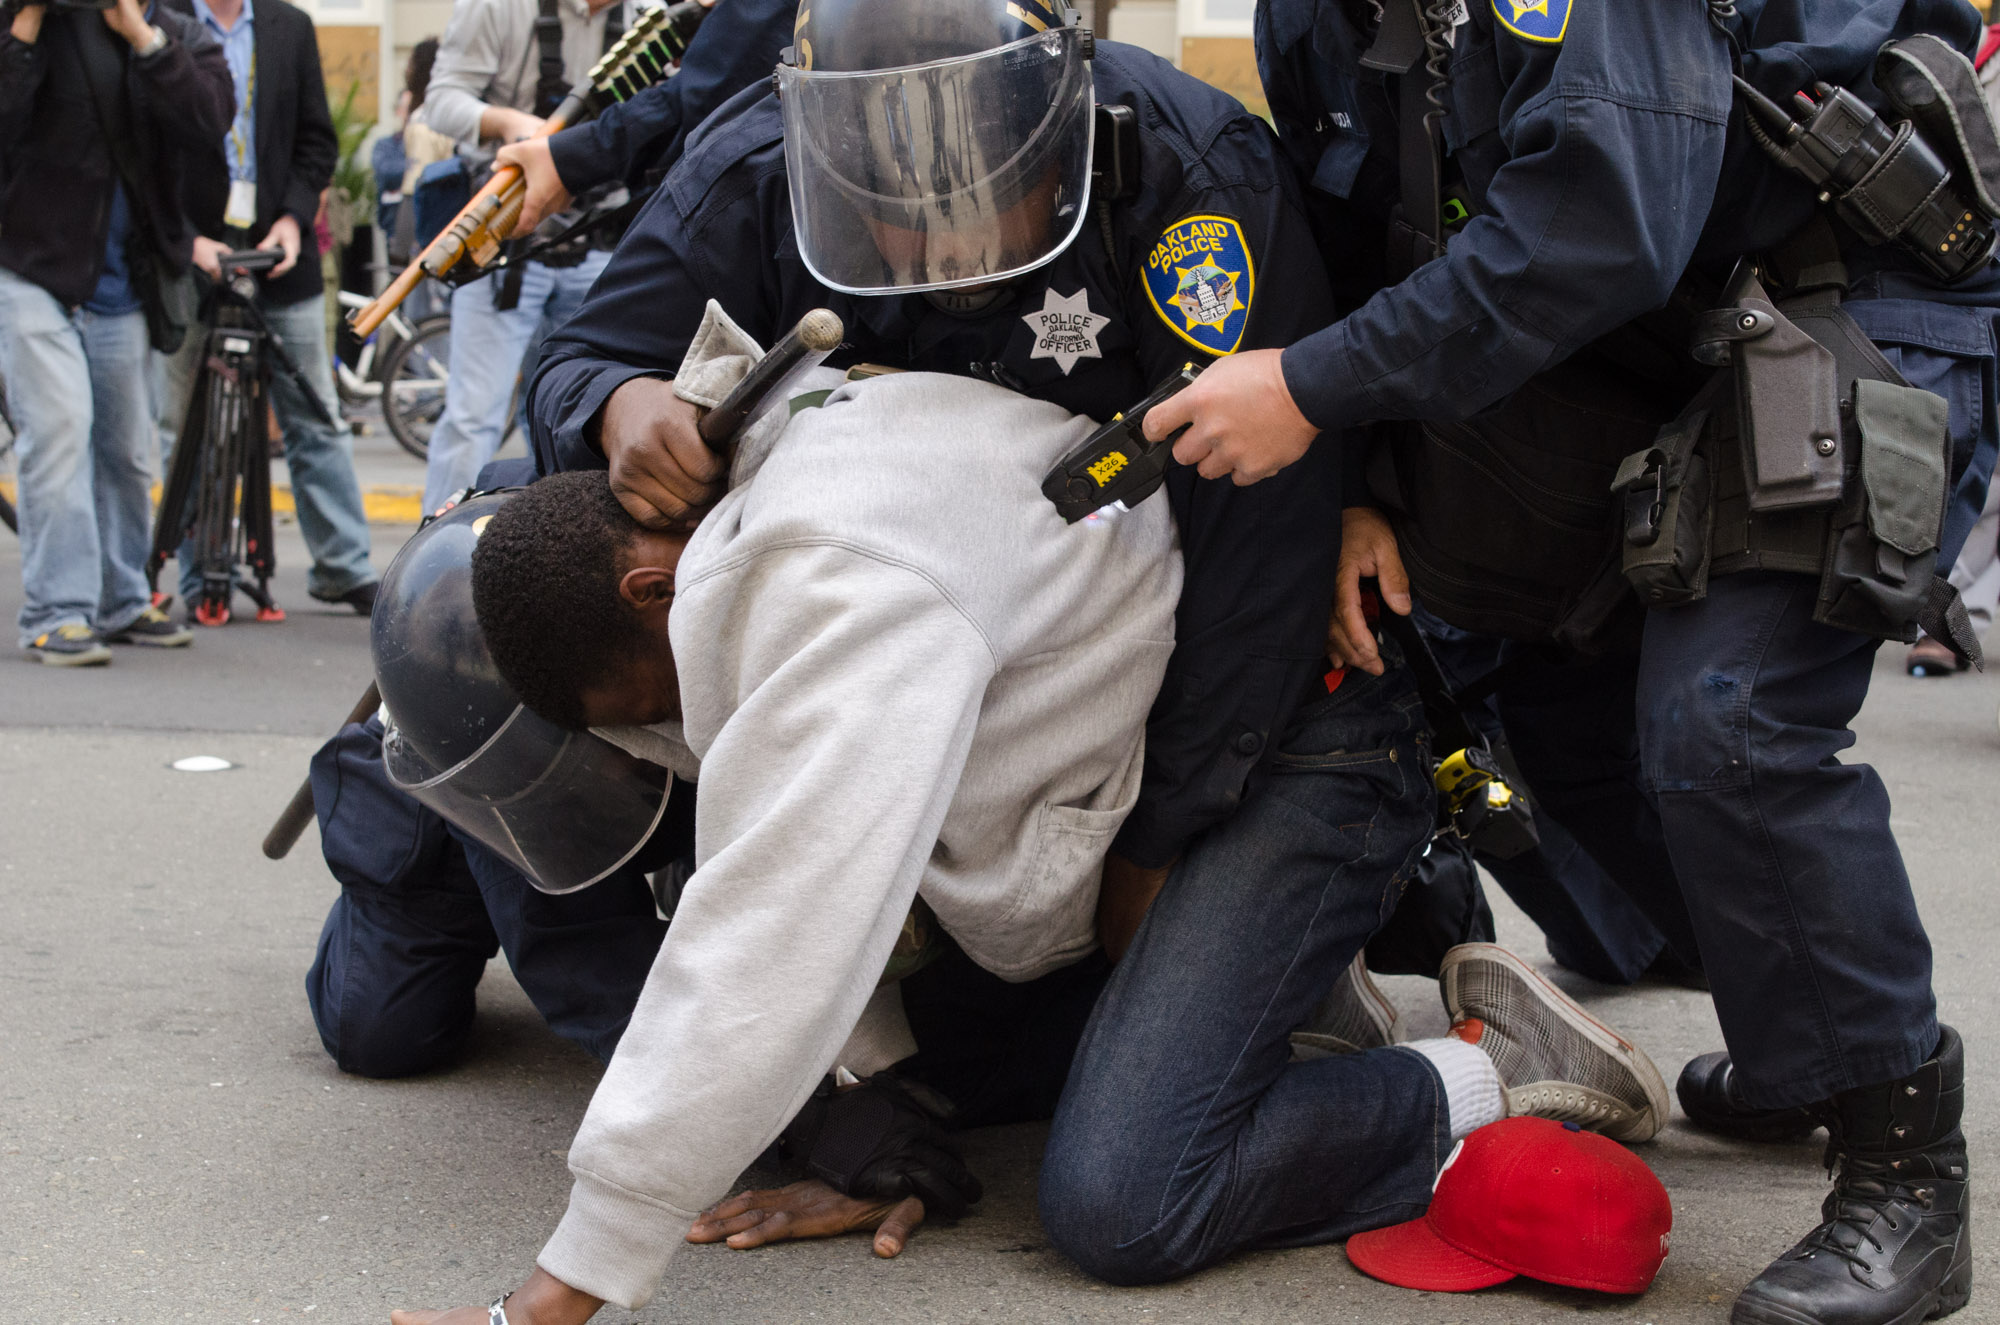 Officers Use a Taser on a Protester During an Arrest